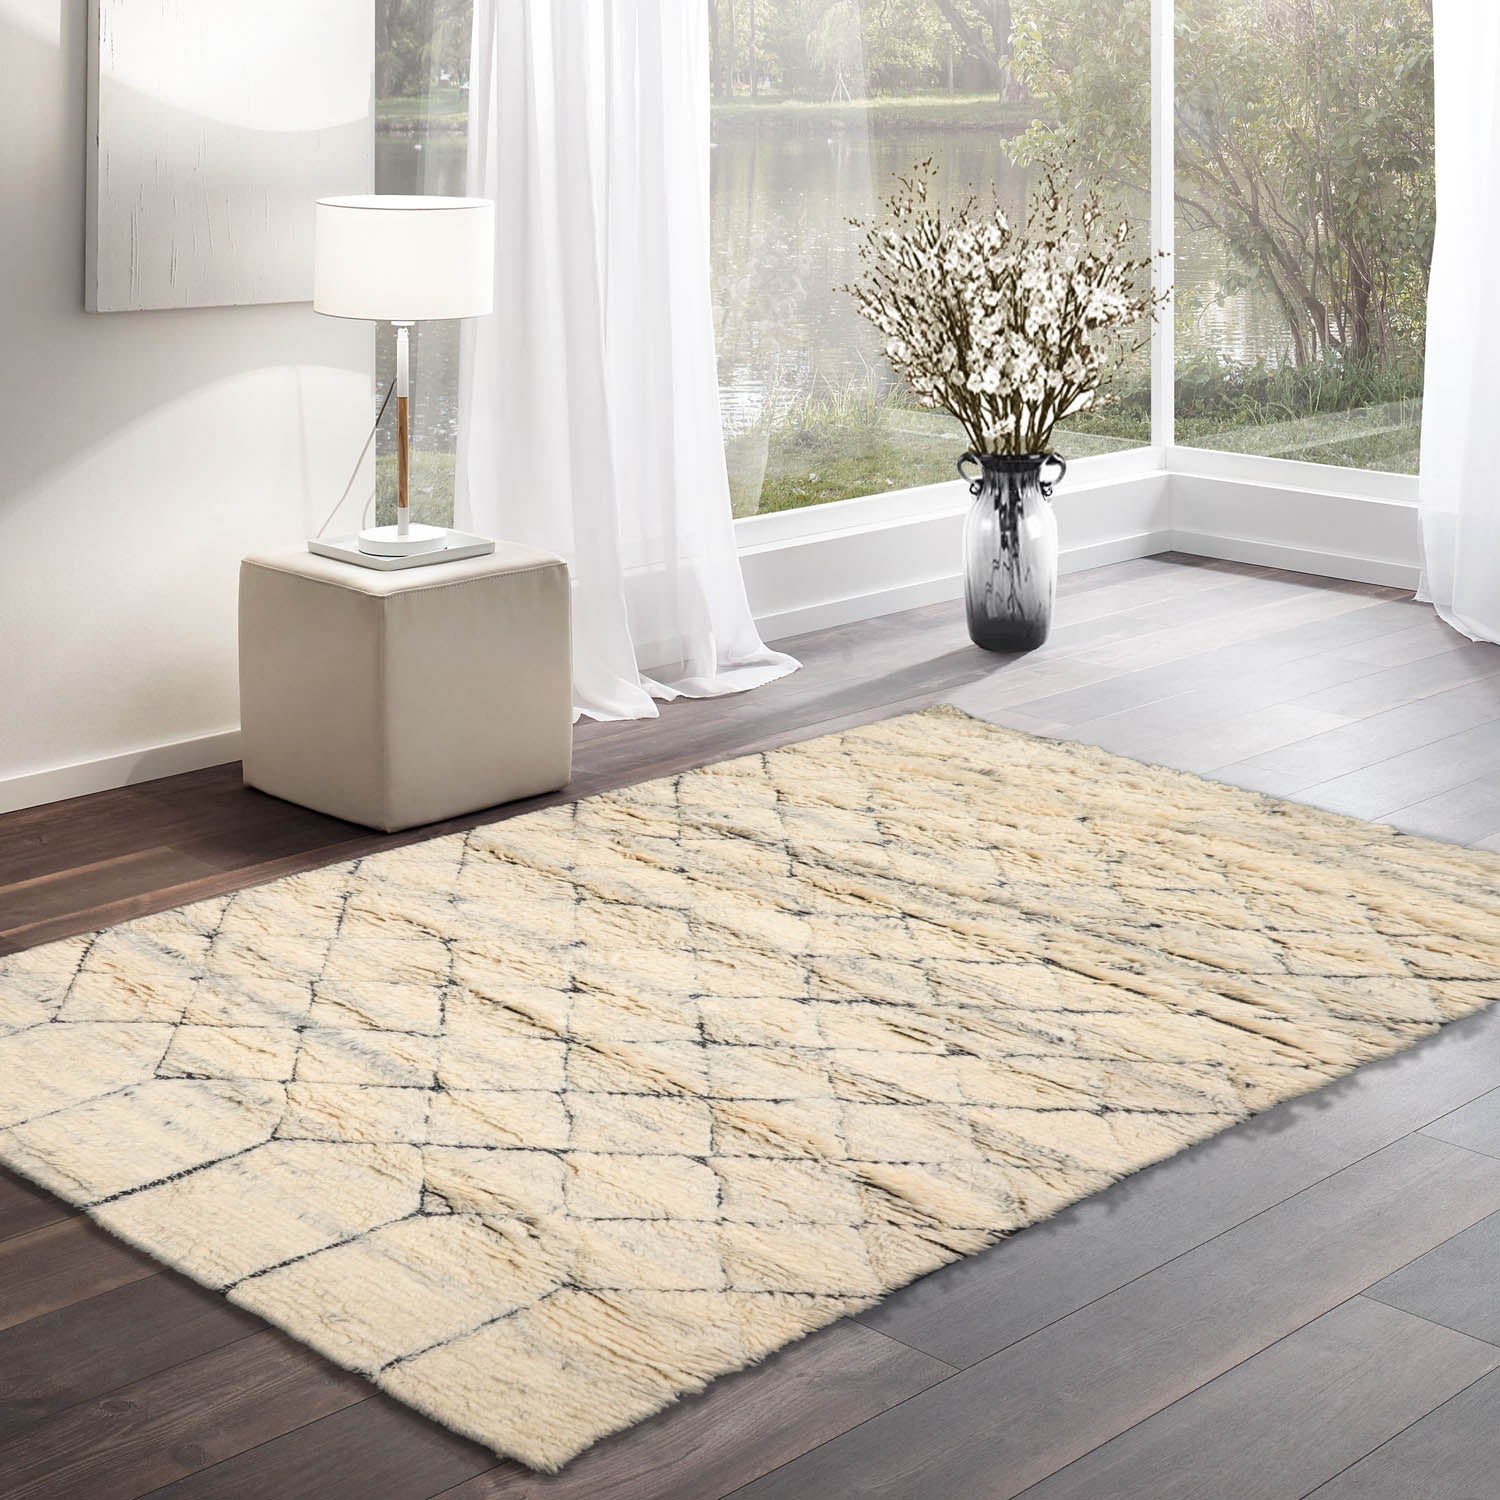 Abston LoomBloom 5x8 Geometric Hand-Knotted Moroccan Rug